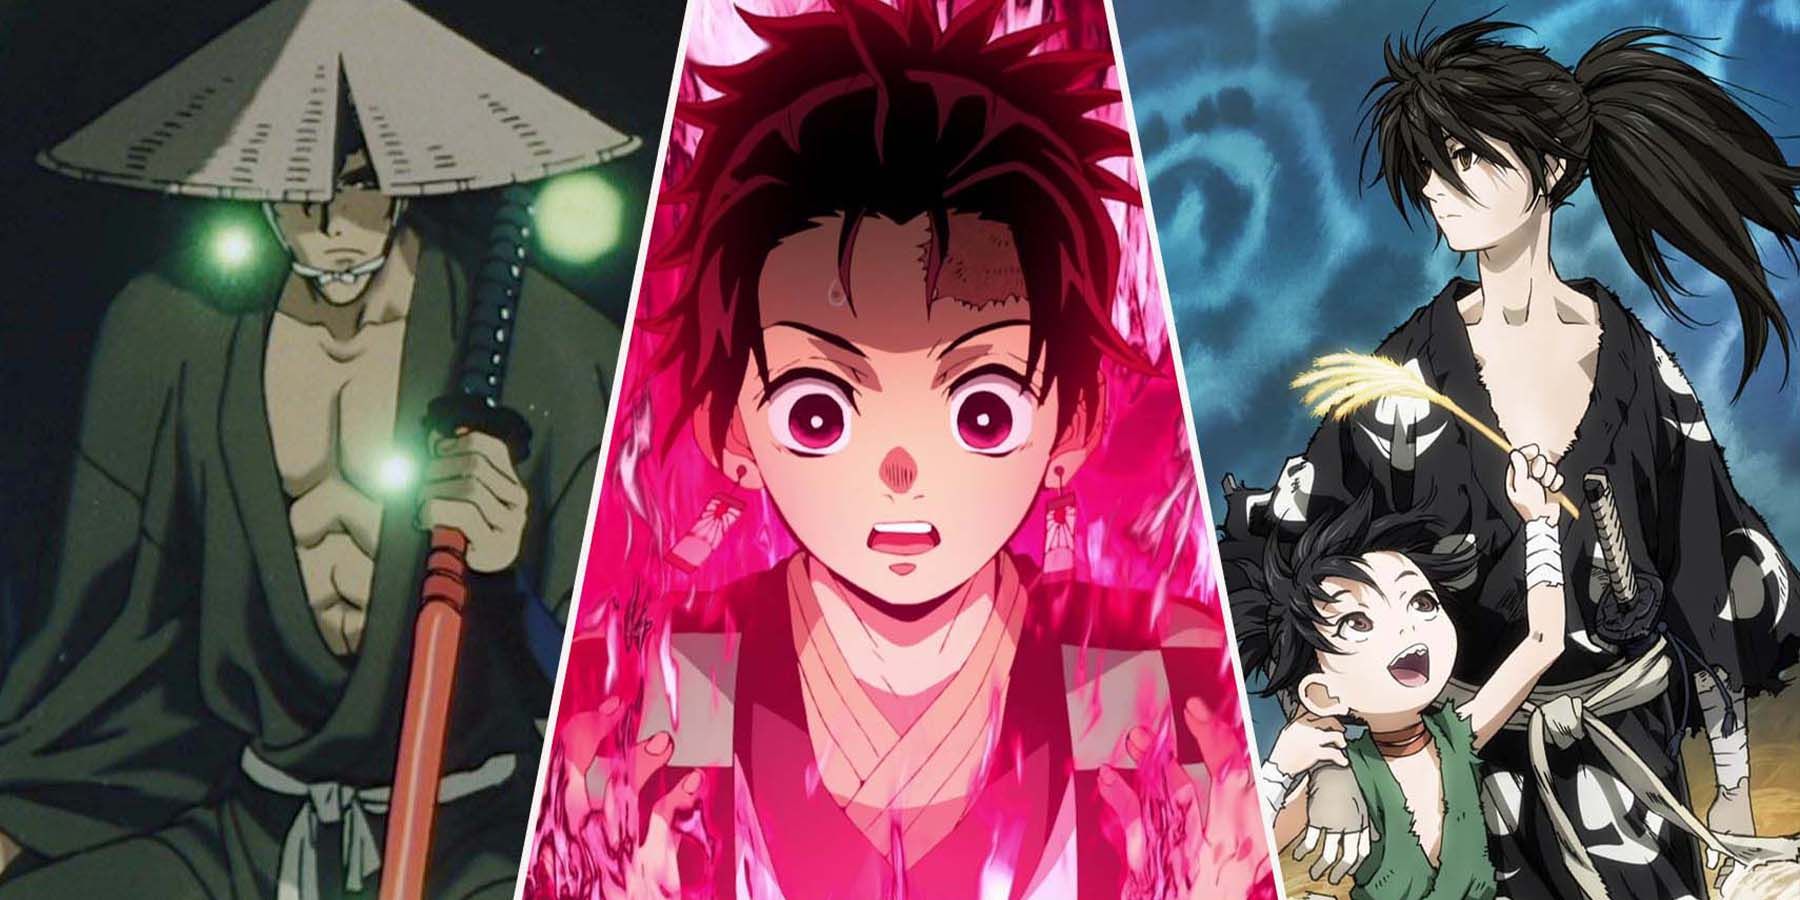 Demon Slayer Is One of the Best New Anime of 2019 - IGN